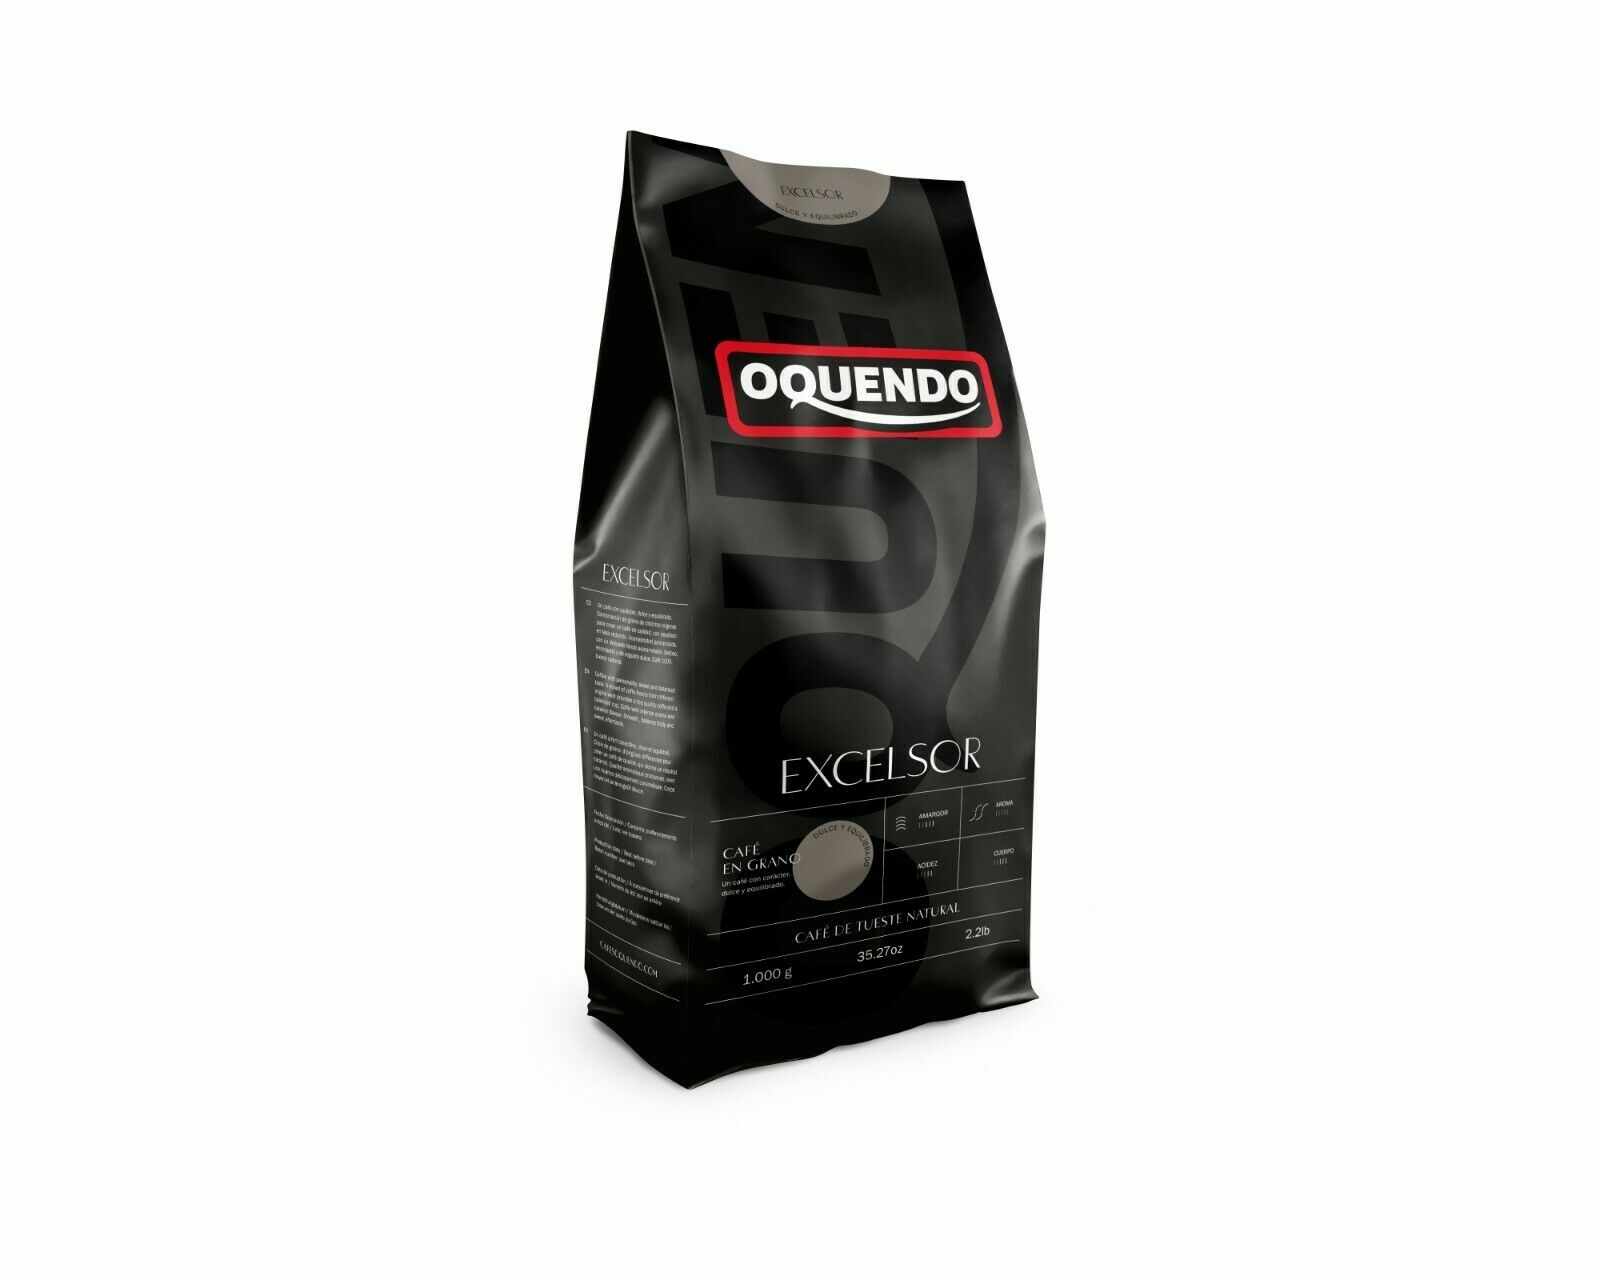 Oquendo Excelsor cafea boabe 1kg